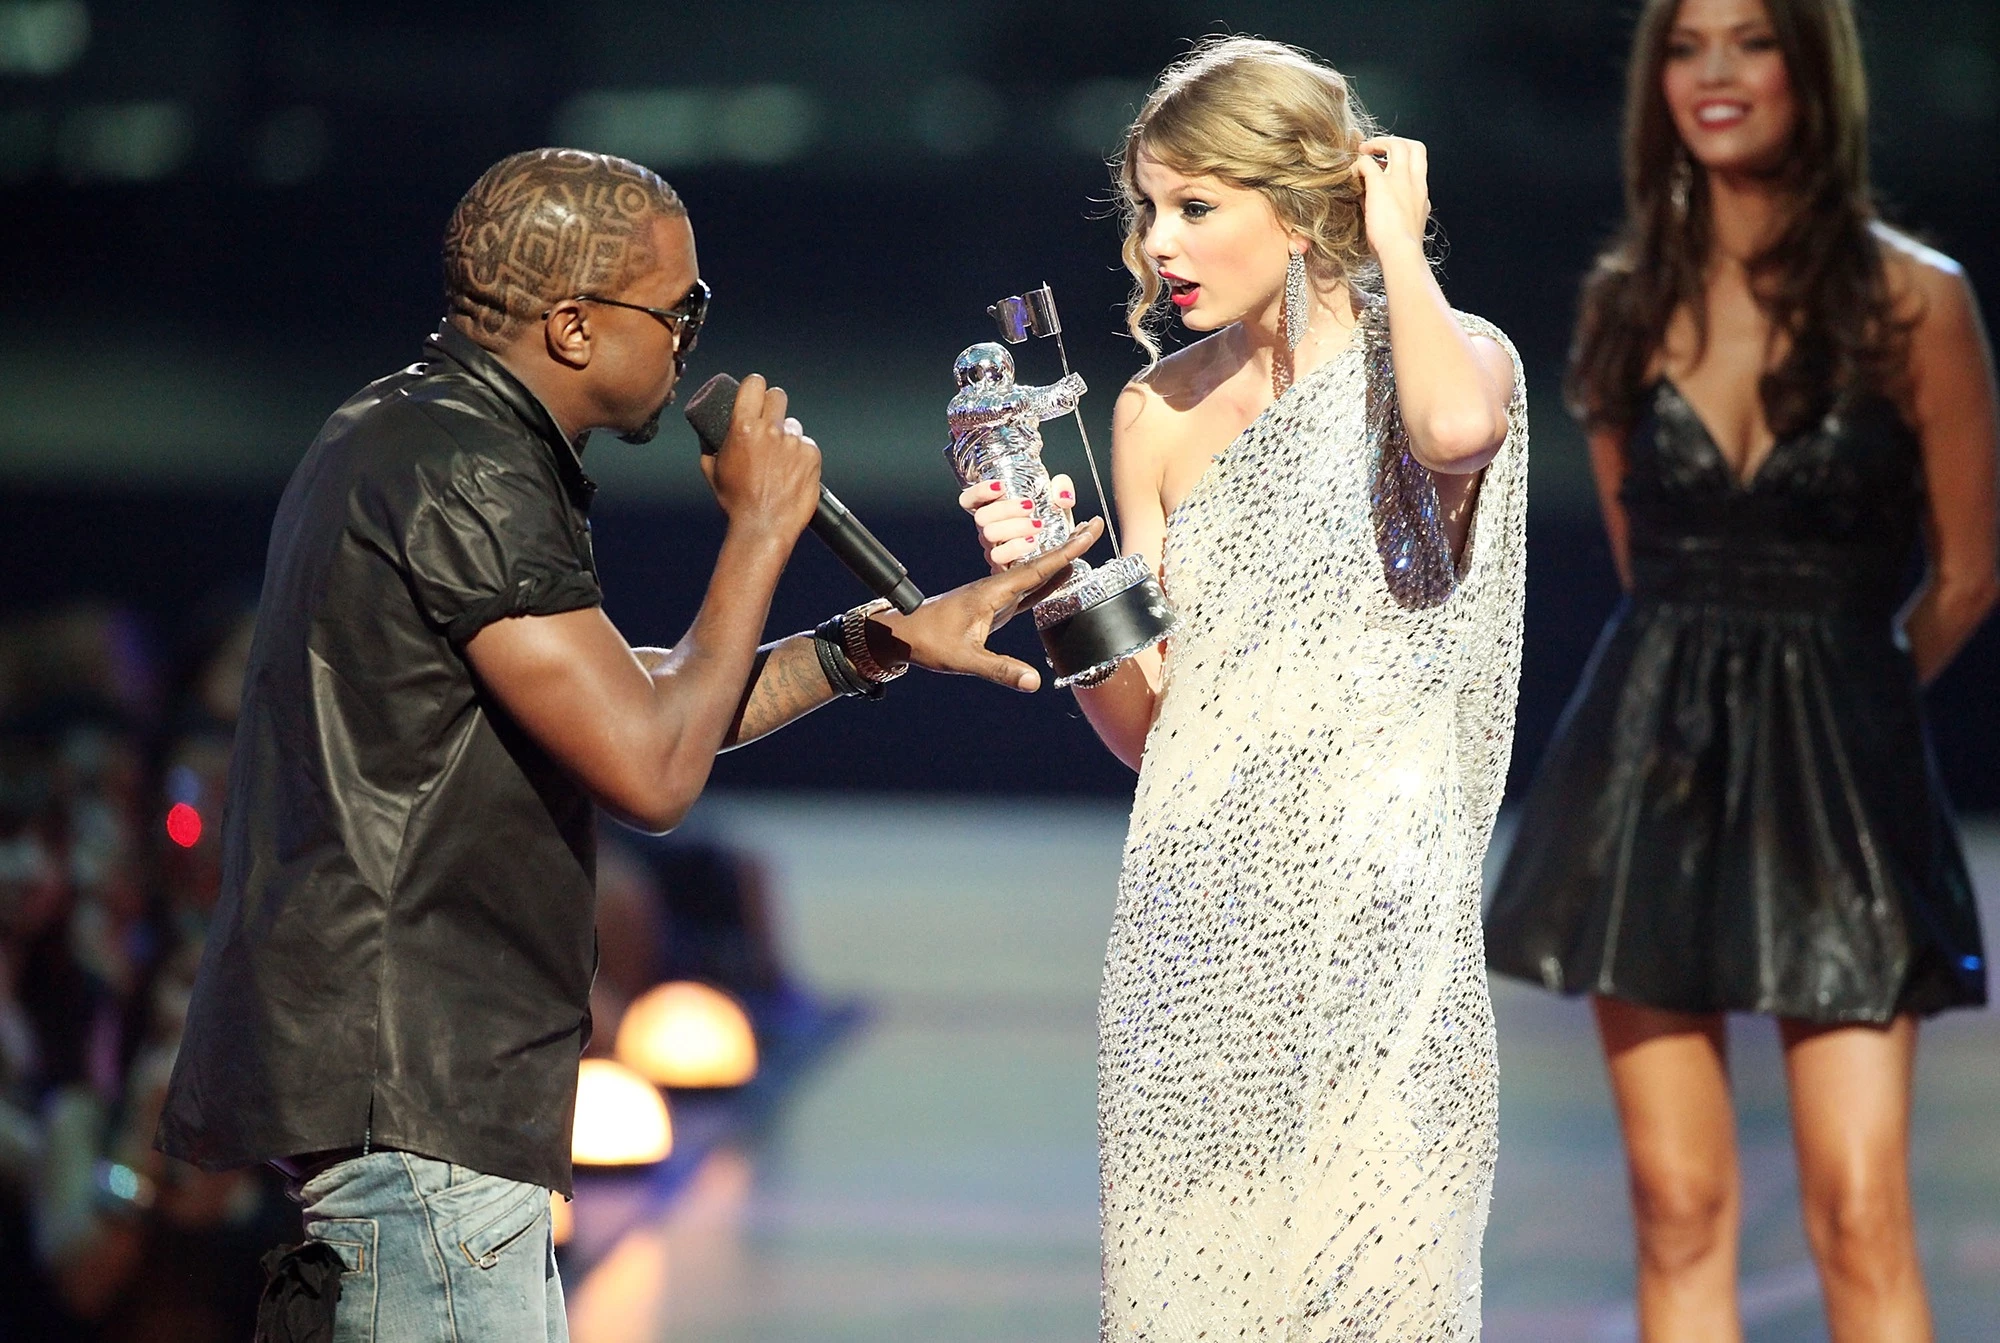 The Kanye West Incident: A Defining Moment In Taylor Swift's Career